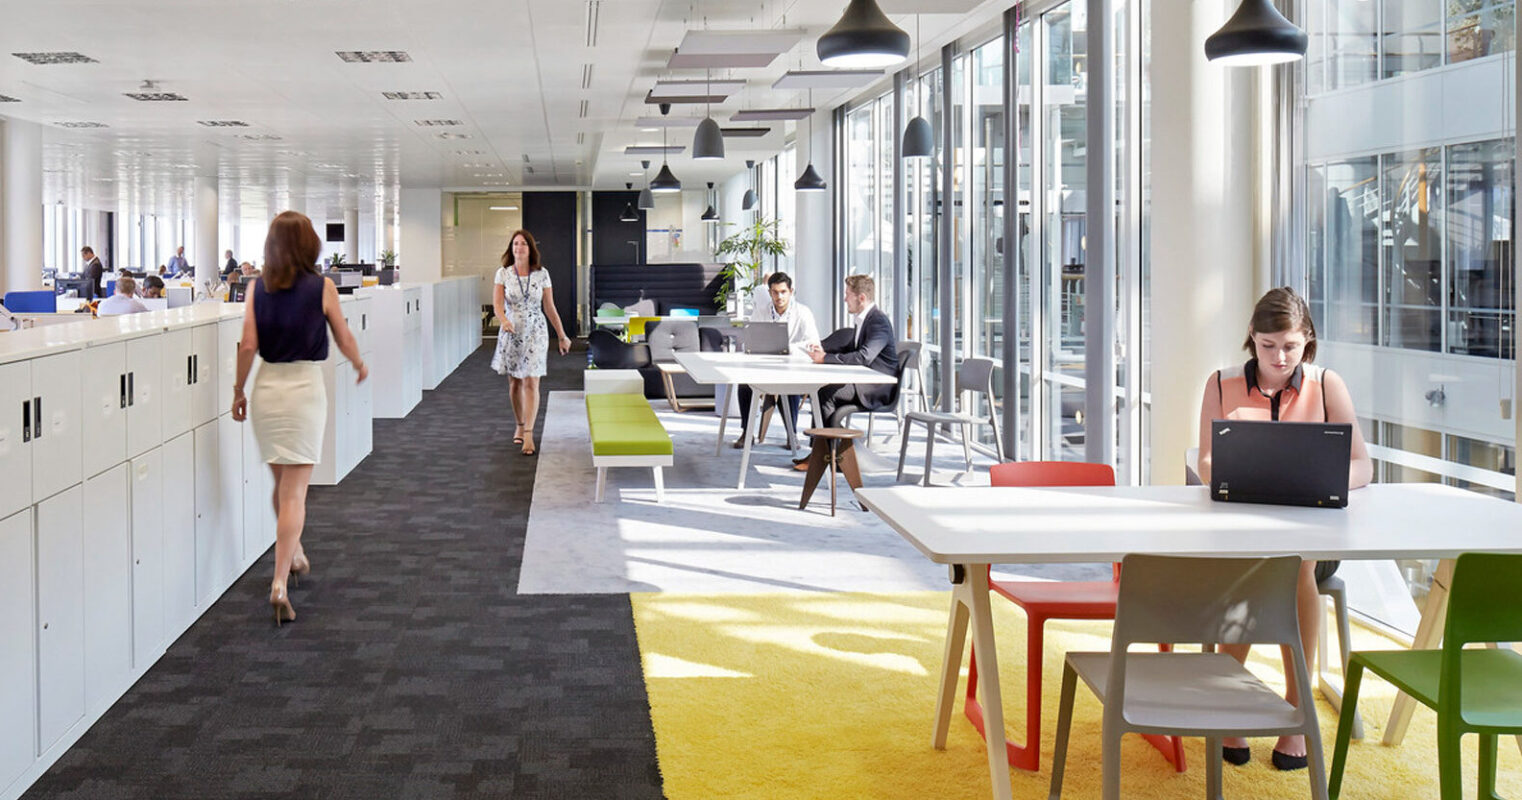 Sunlight streams into a modern office space featuring long white desks, colorful ergonomic chairs, and pendant lighting. Employees work at spaced-out stations promoting productivity and social distancing. The vibrant yellow carpet adds a cheerful accent to the clean, minimalist design.